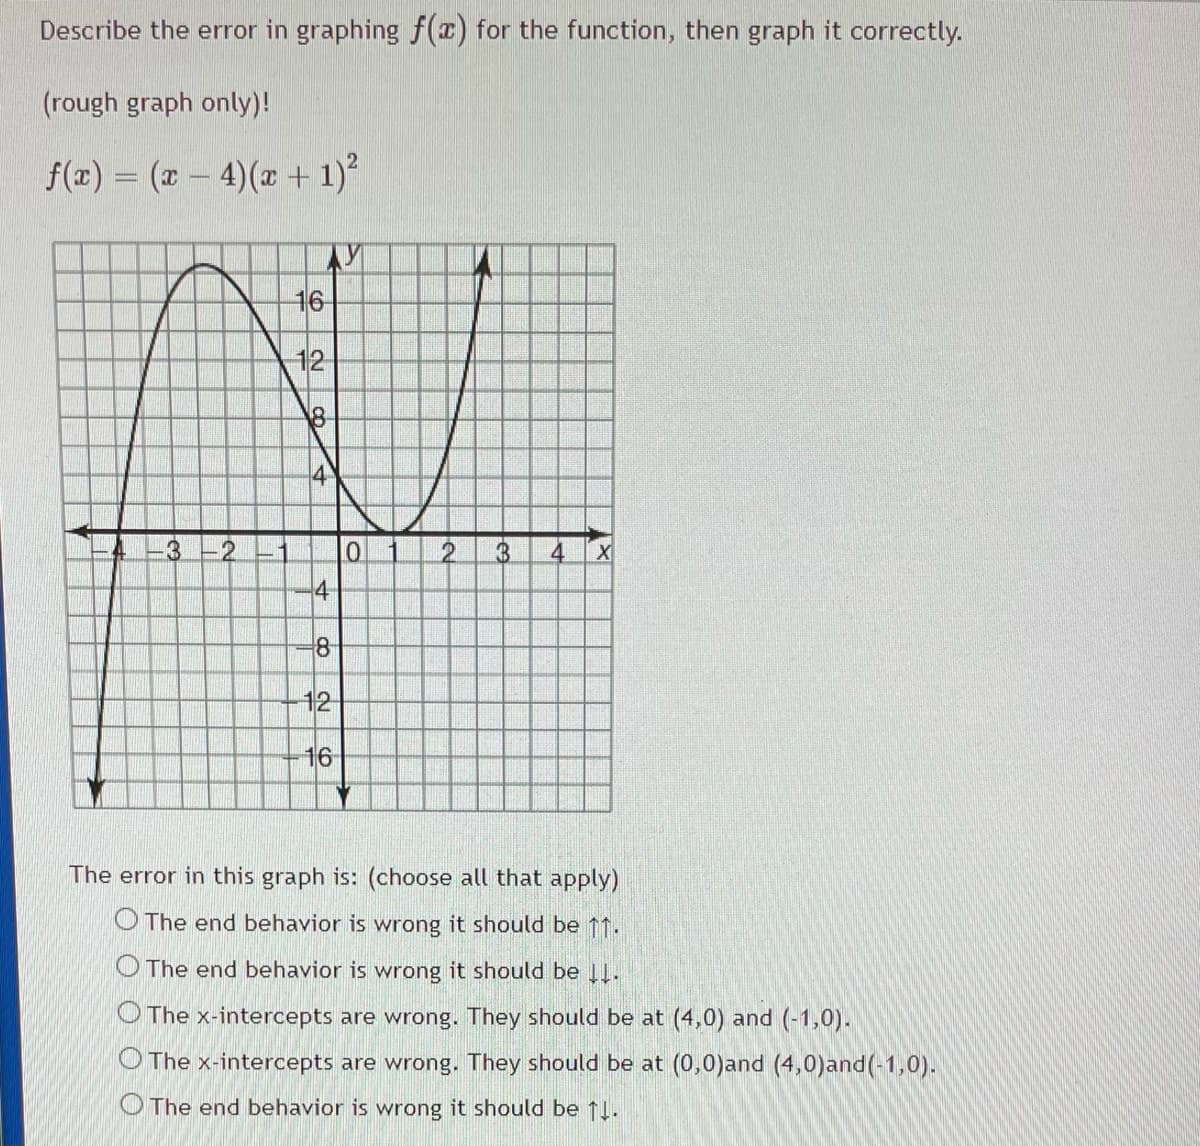 Describe the error in graphing f (x) for the function, then graph it correctly.
(rough graph only)!
f(x) = (x – 4)(x + 1)?
16
12
18
4
8
12
16
The error in this graph is: (choose all that apply)
O The end behavior is wrong it should be 11.
O The end behavior is wrong it should be 1.
O The x-intercepts are wrong. They should be at (4,0) and (-1,0).
O The x-intercepts are wrong. They should be at (0,0)and (4,0)and(-1,0).
O The end behavior is wrong it should be 1!.
